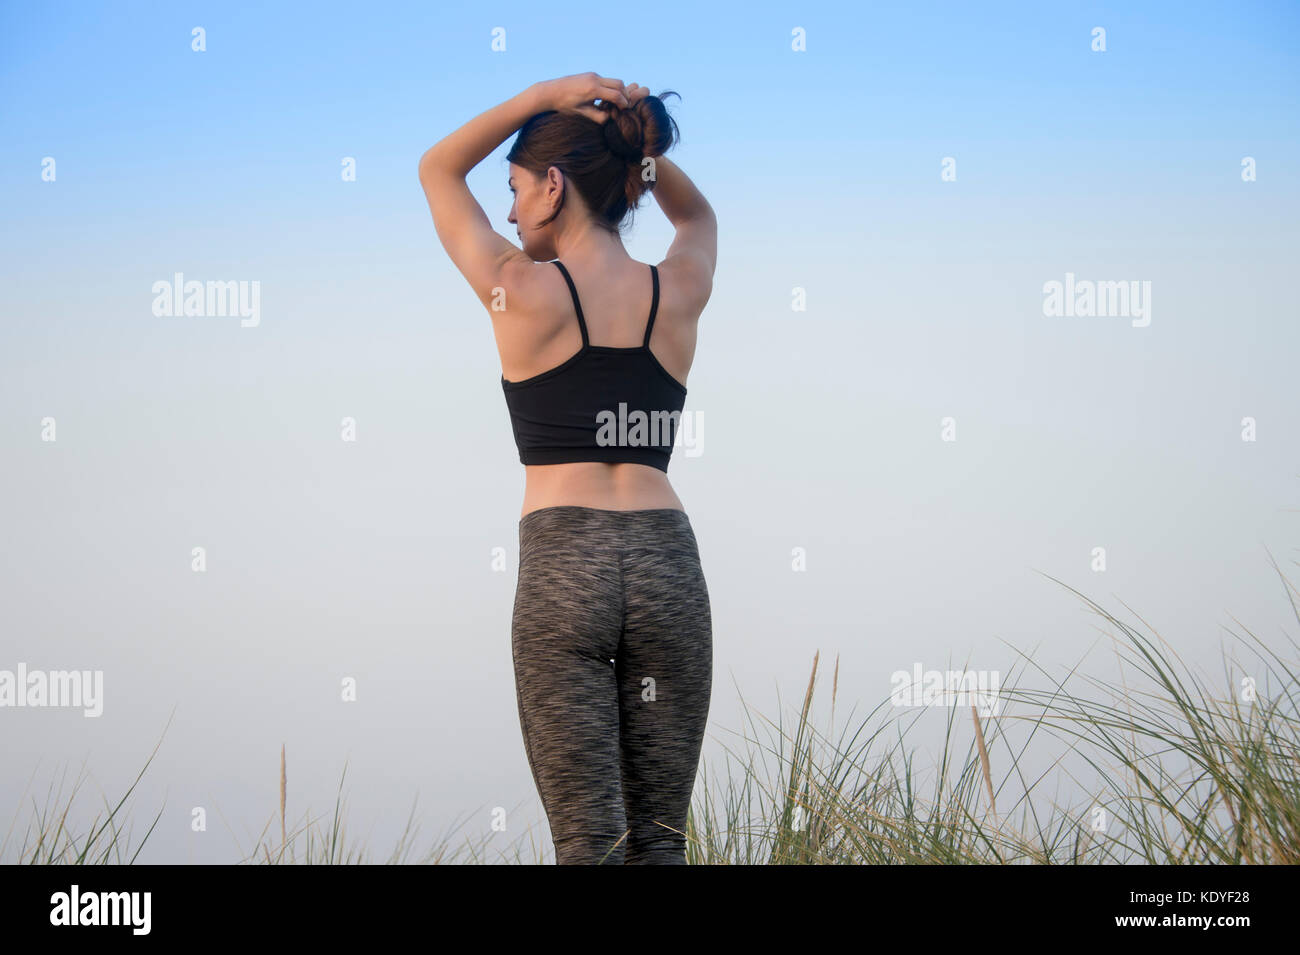 back view of a sporty woman tying her hair up before exercising outside Stock Photo